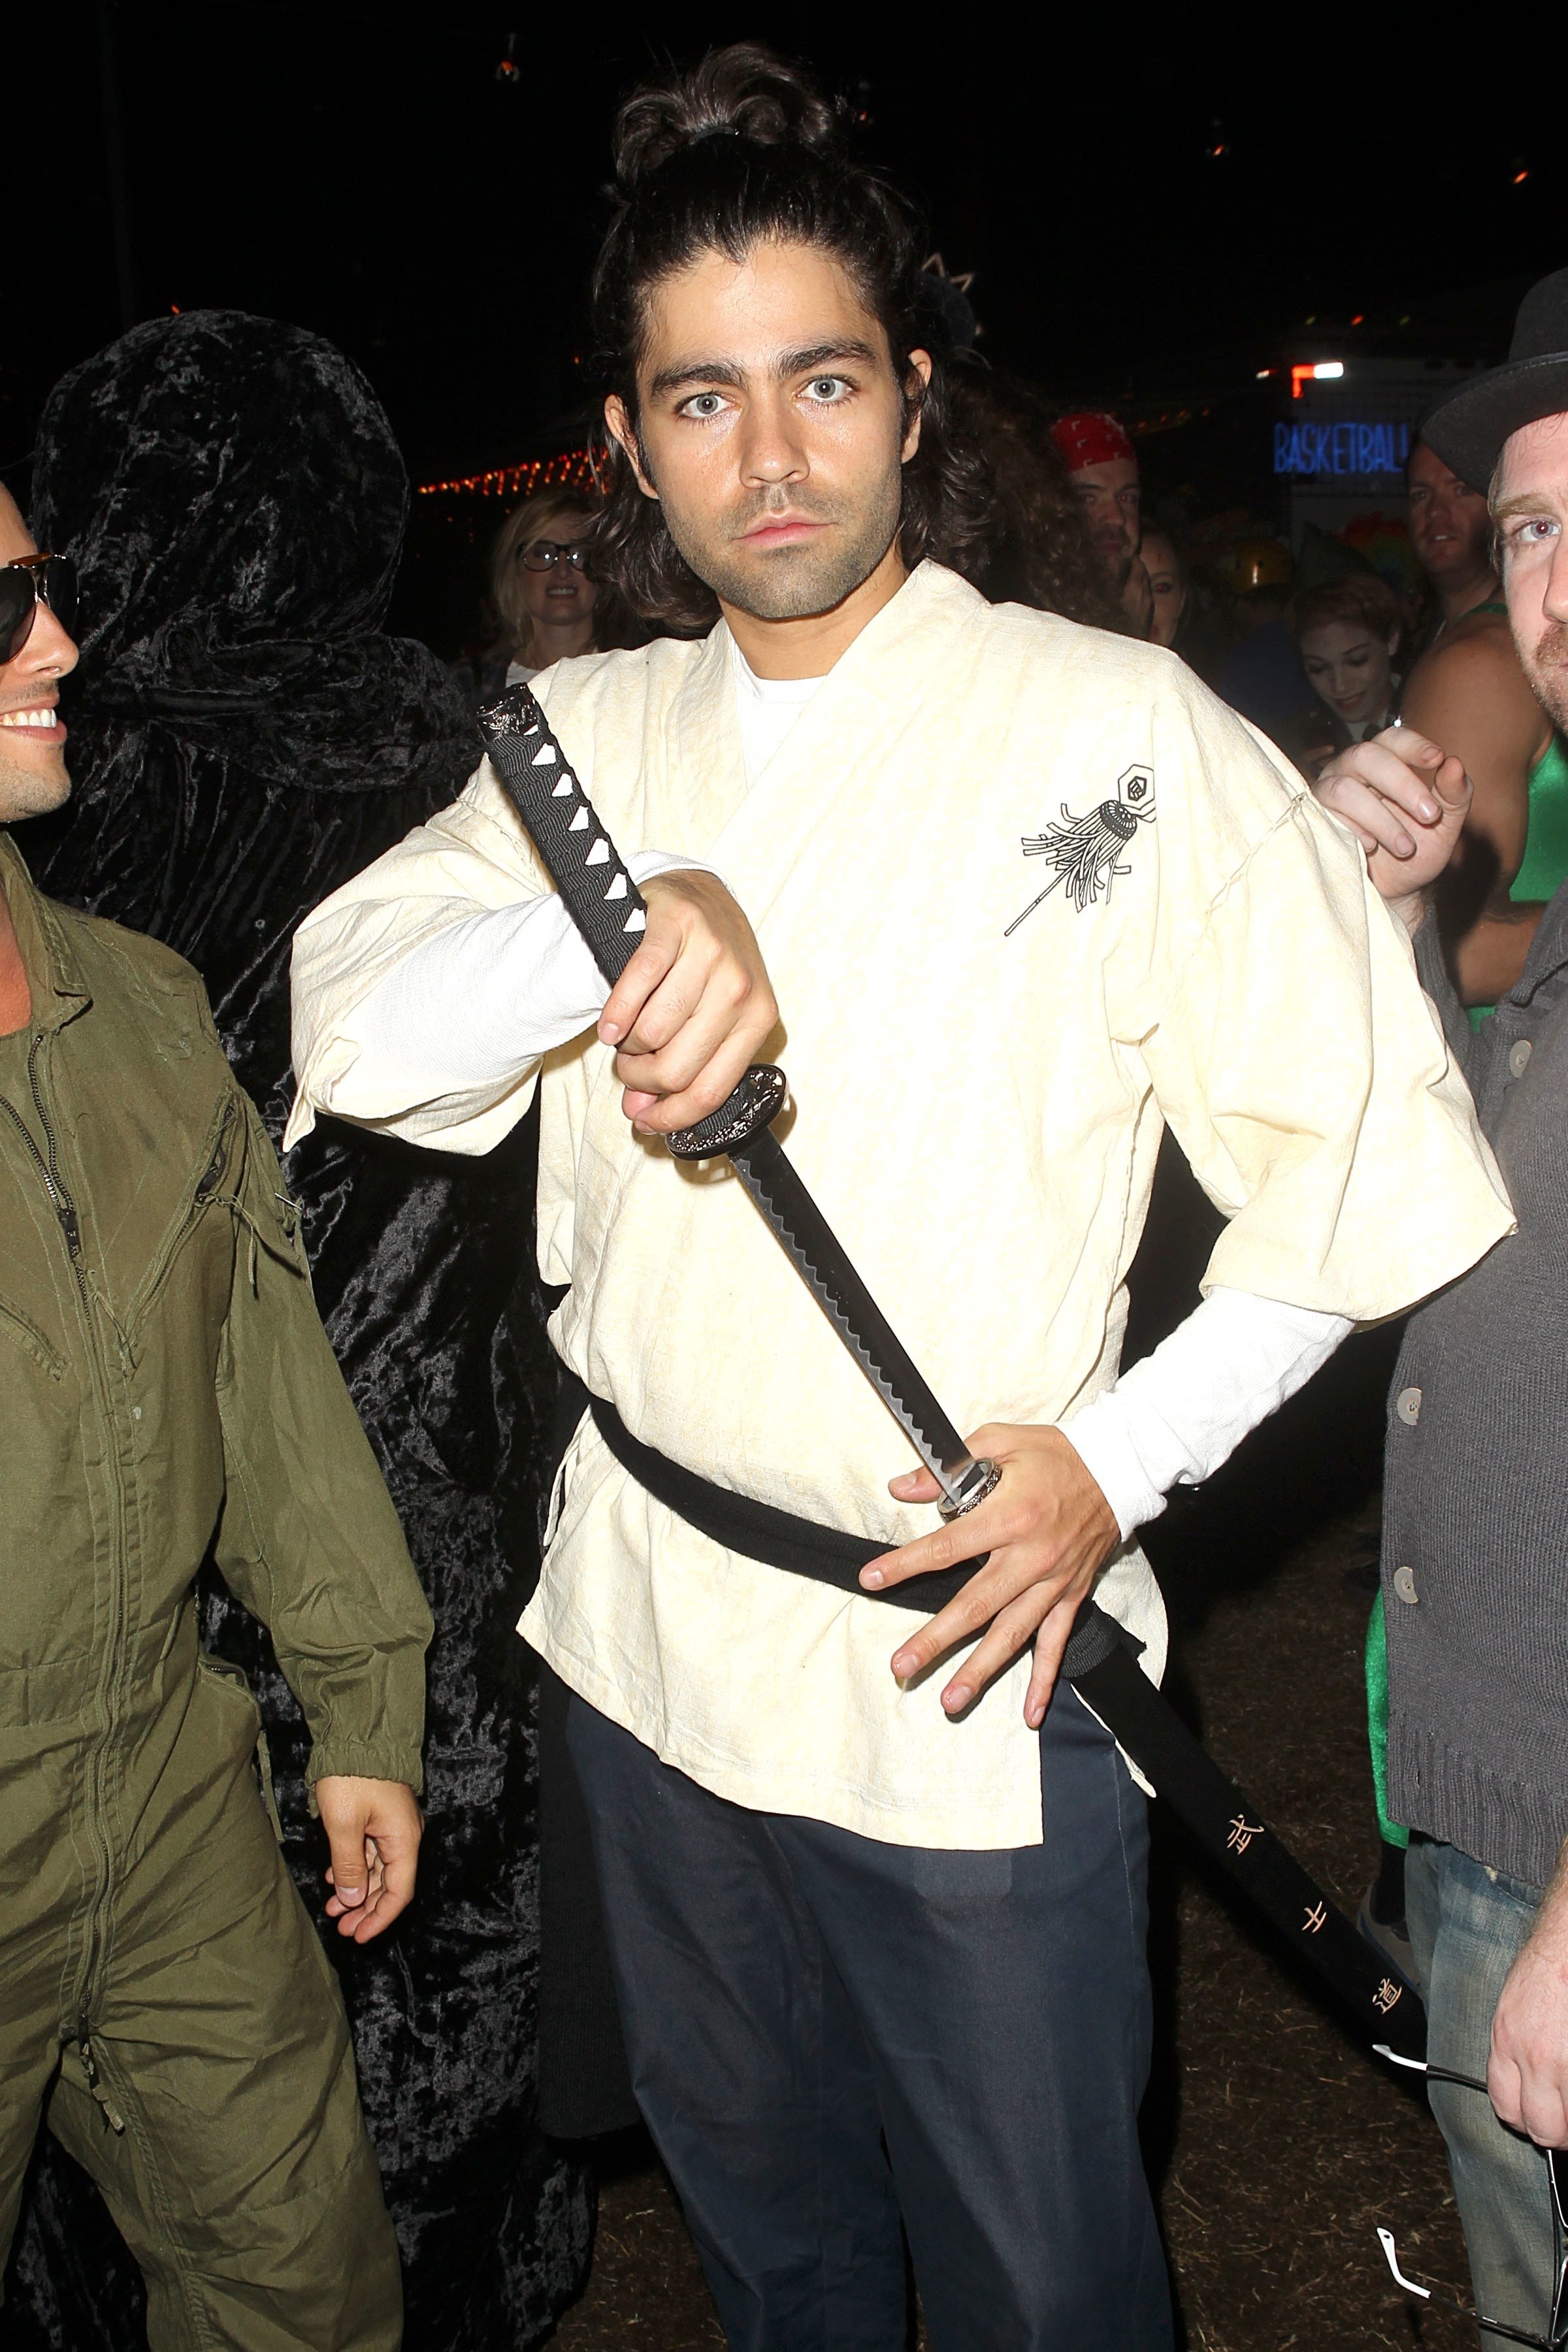 10 Spectacular Good Costume Ideas For Guys 18 last minute celebrity halloween costumes that werent half bad 15 2022